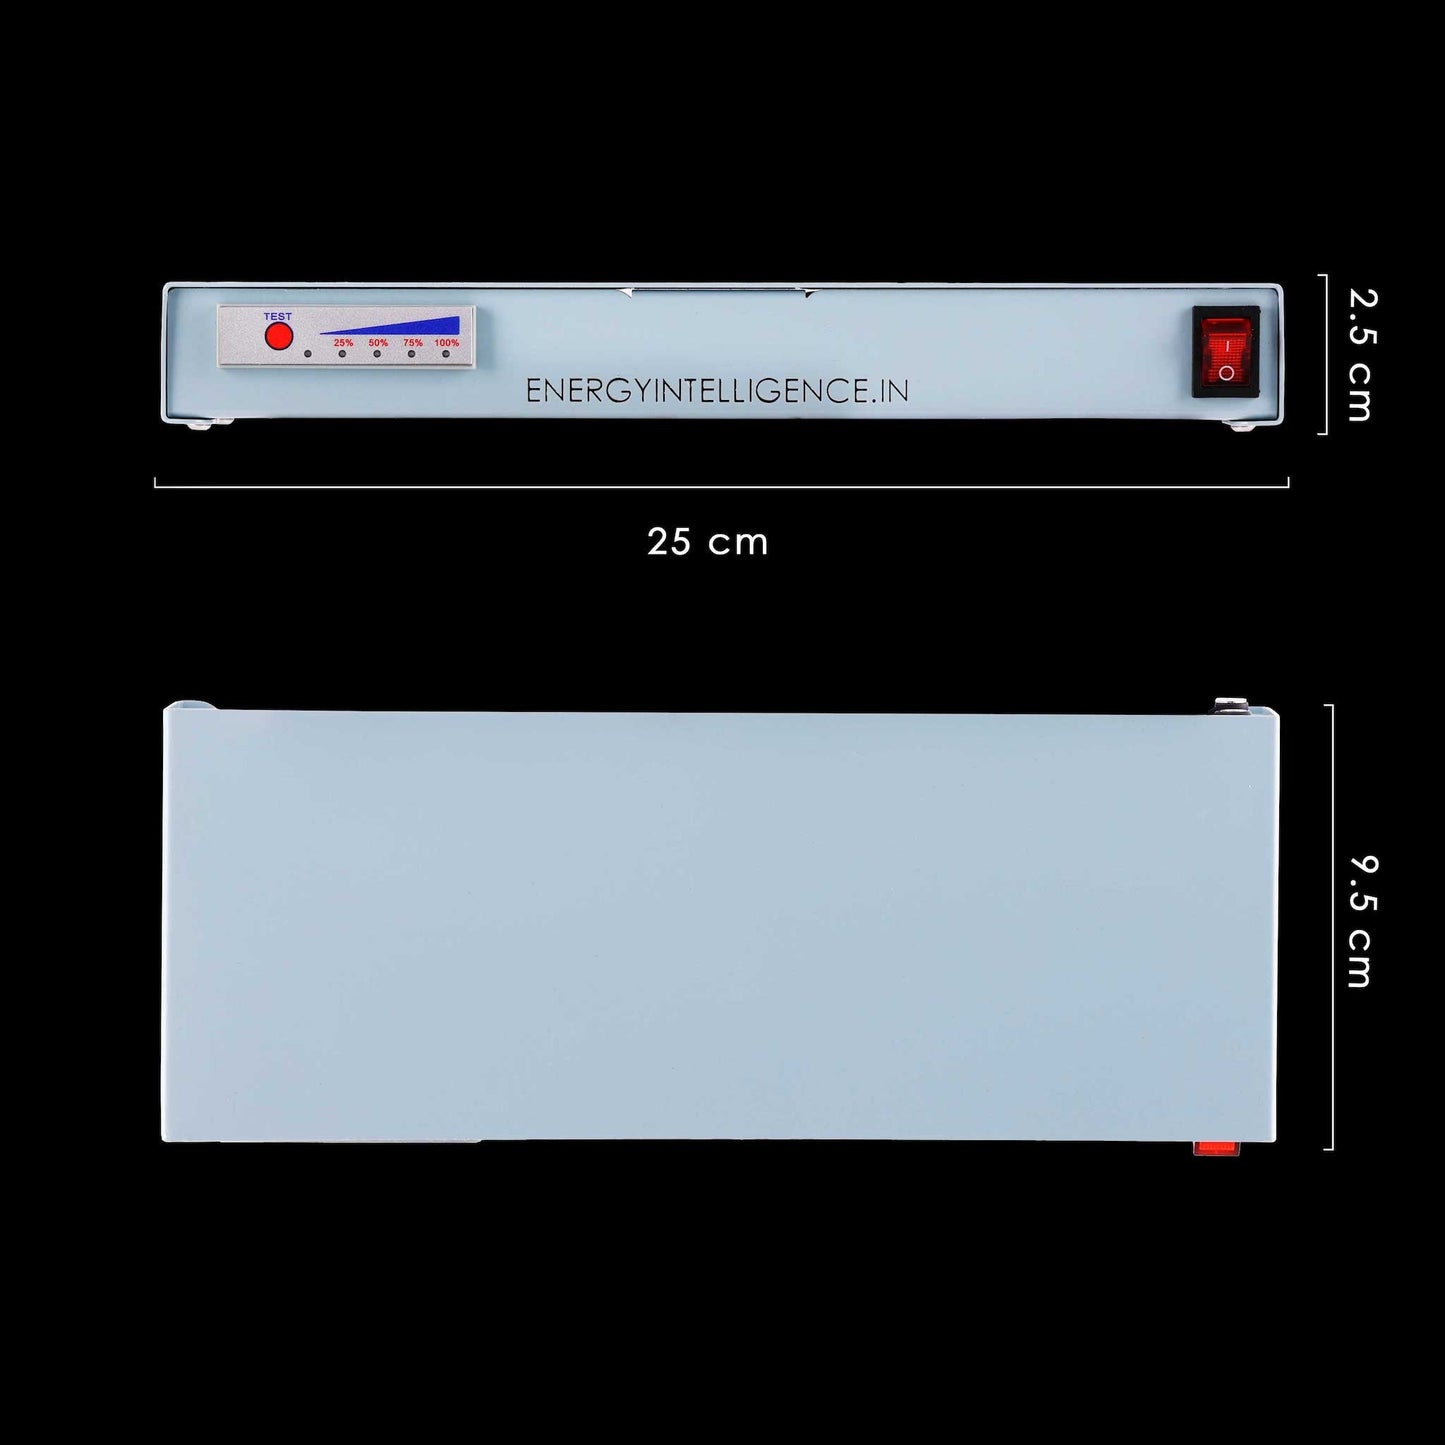 An Image showing the dimensions of the NUC powerbank in black background. Length 25cm, Height 2.5 cm and width 9.5cm